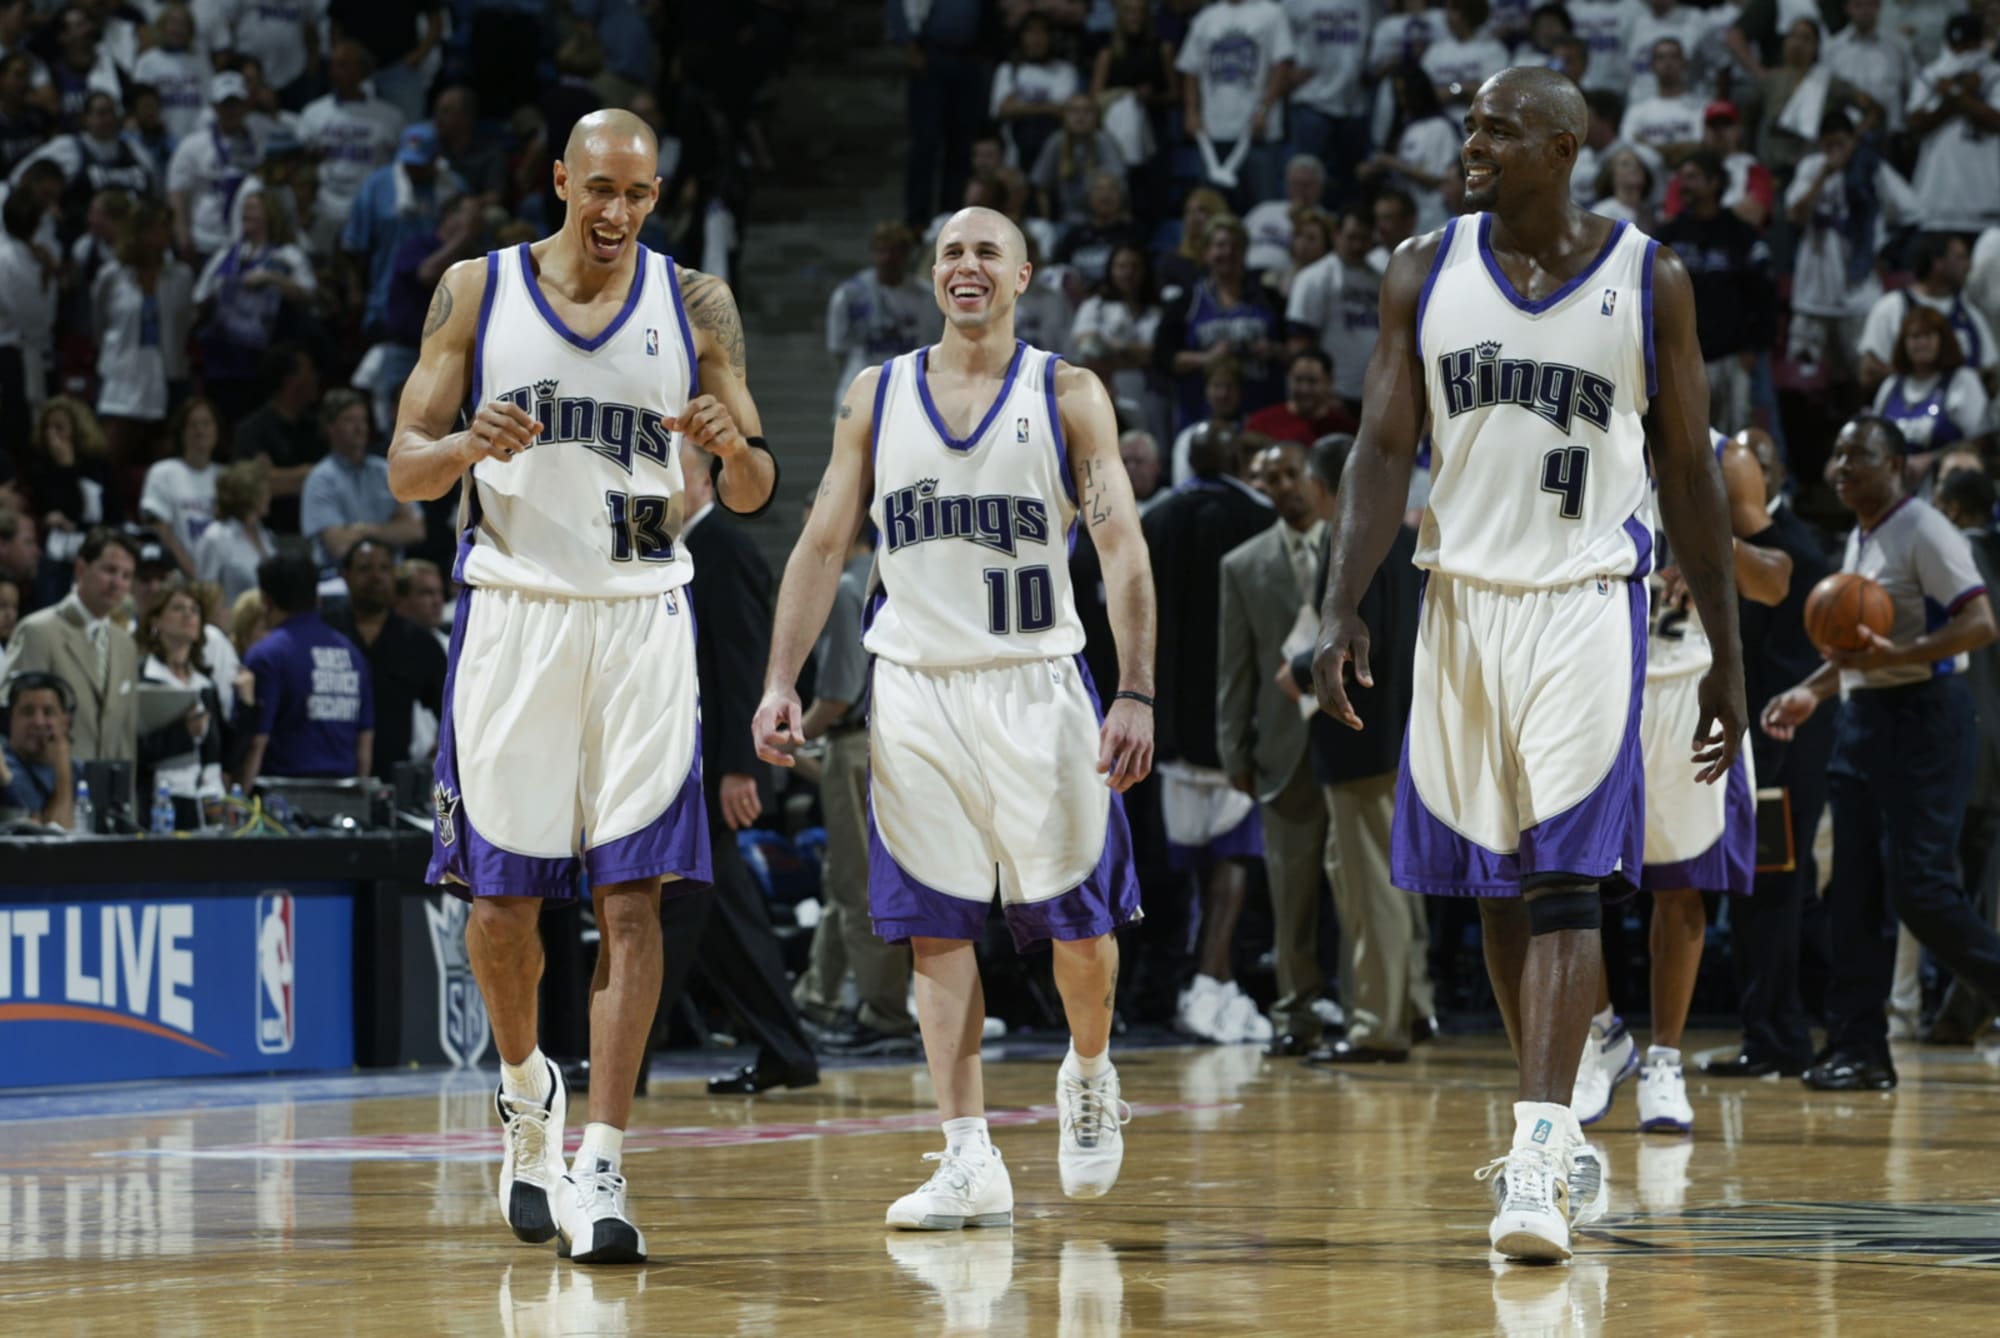 Sacramento Kings: When was the last time they made the playoffs?